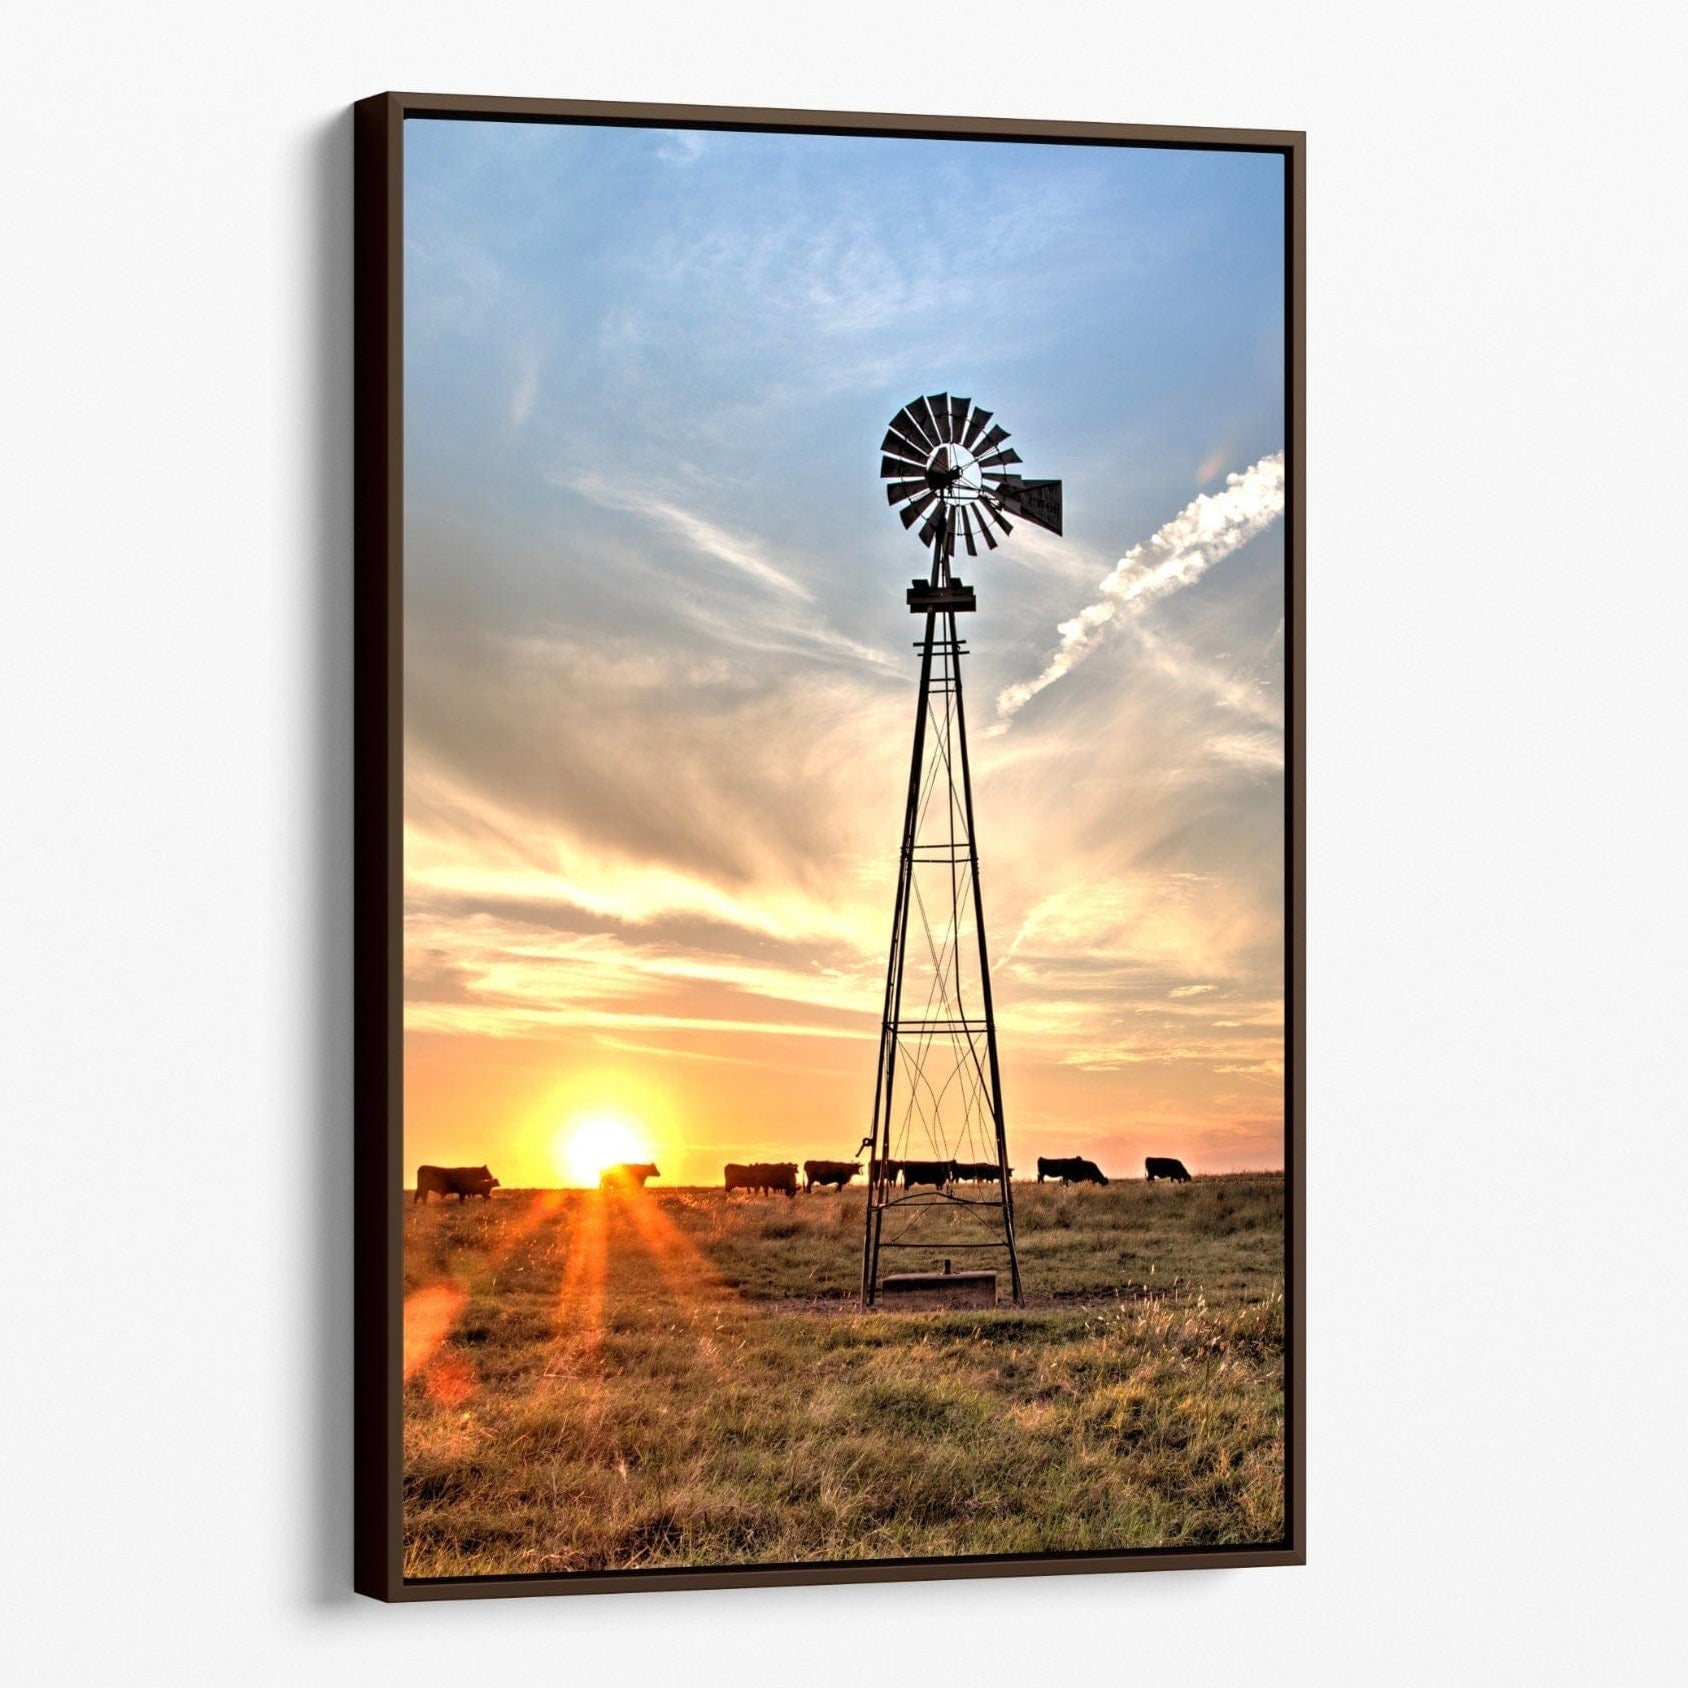 Rustic Old Windmill and Black Angus Cows Wall Art Canvas-Walnut Frame / 12 x 18 Inches Wall Art Teri James Photography